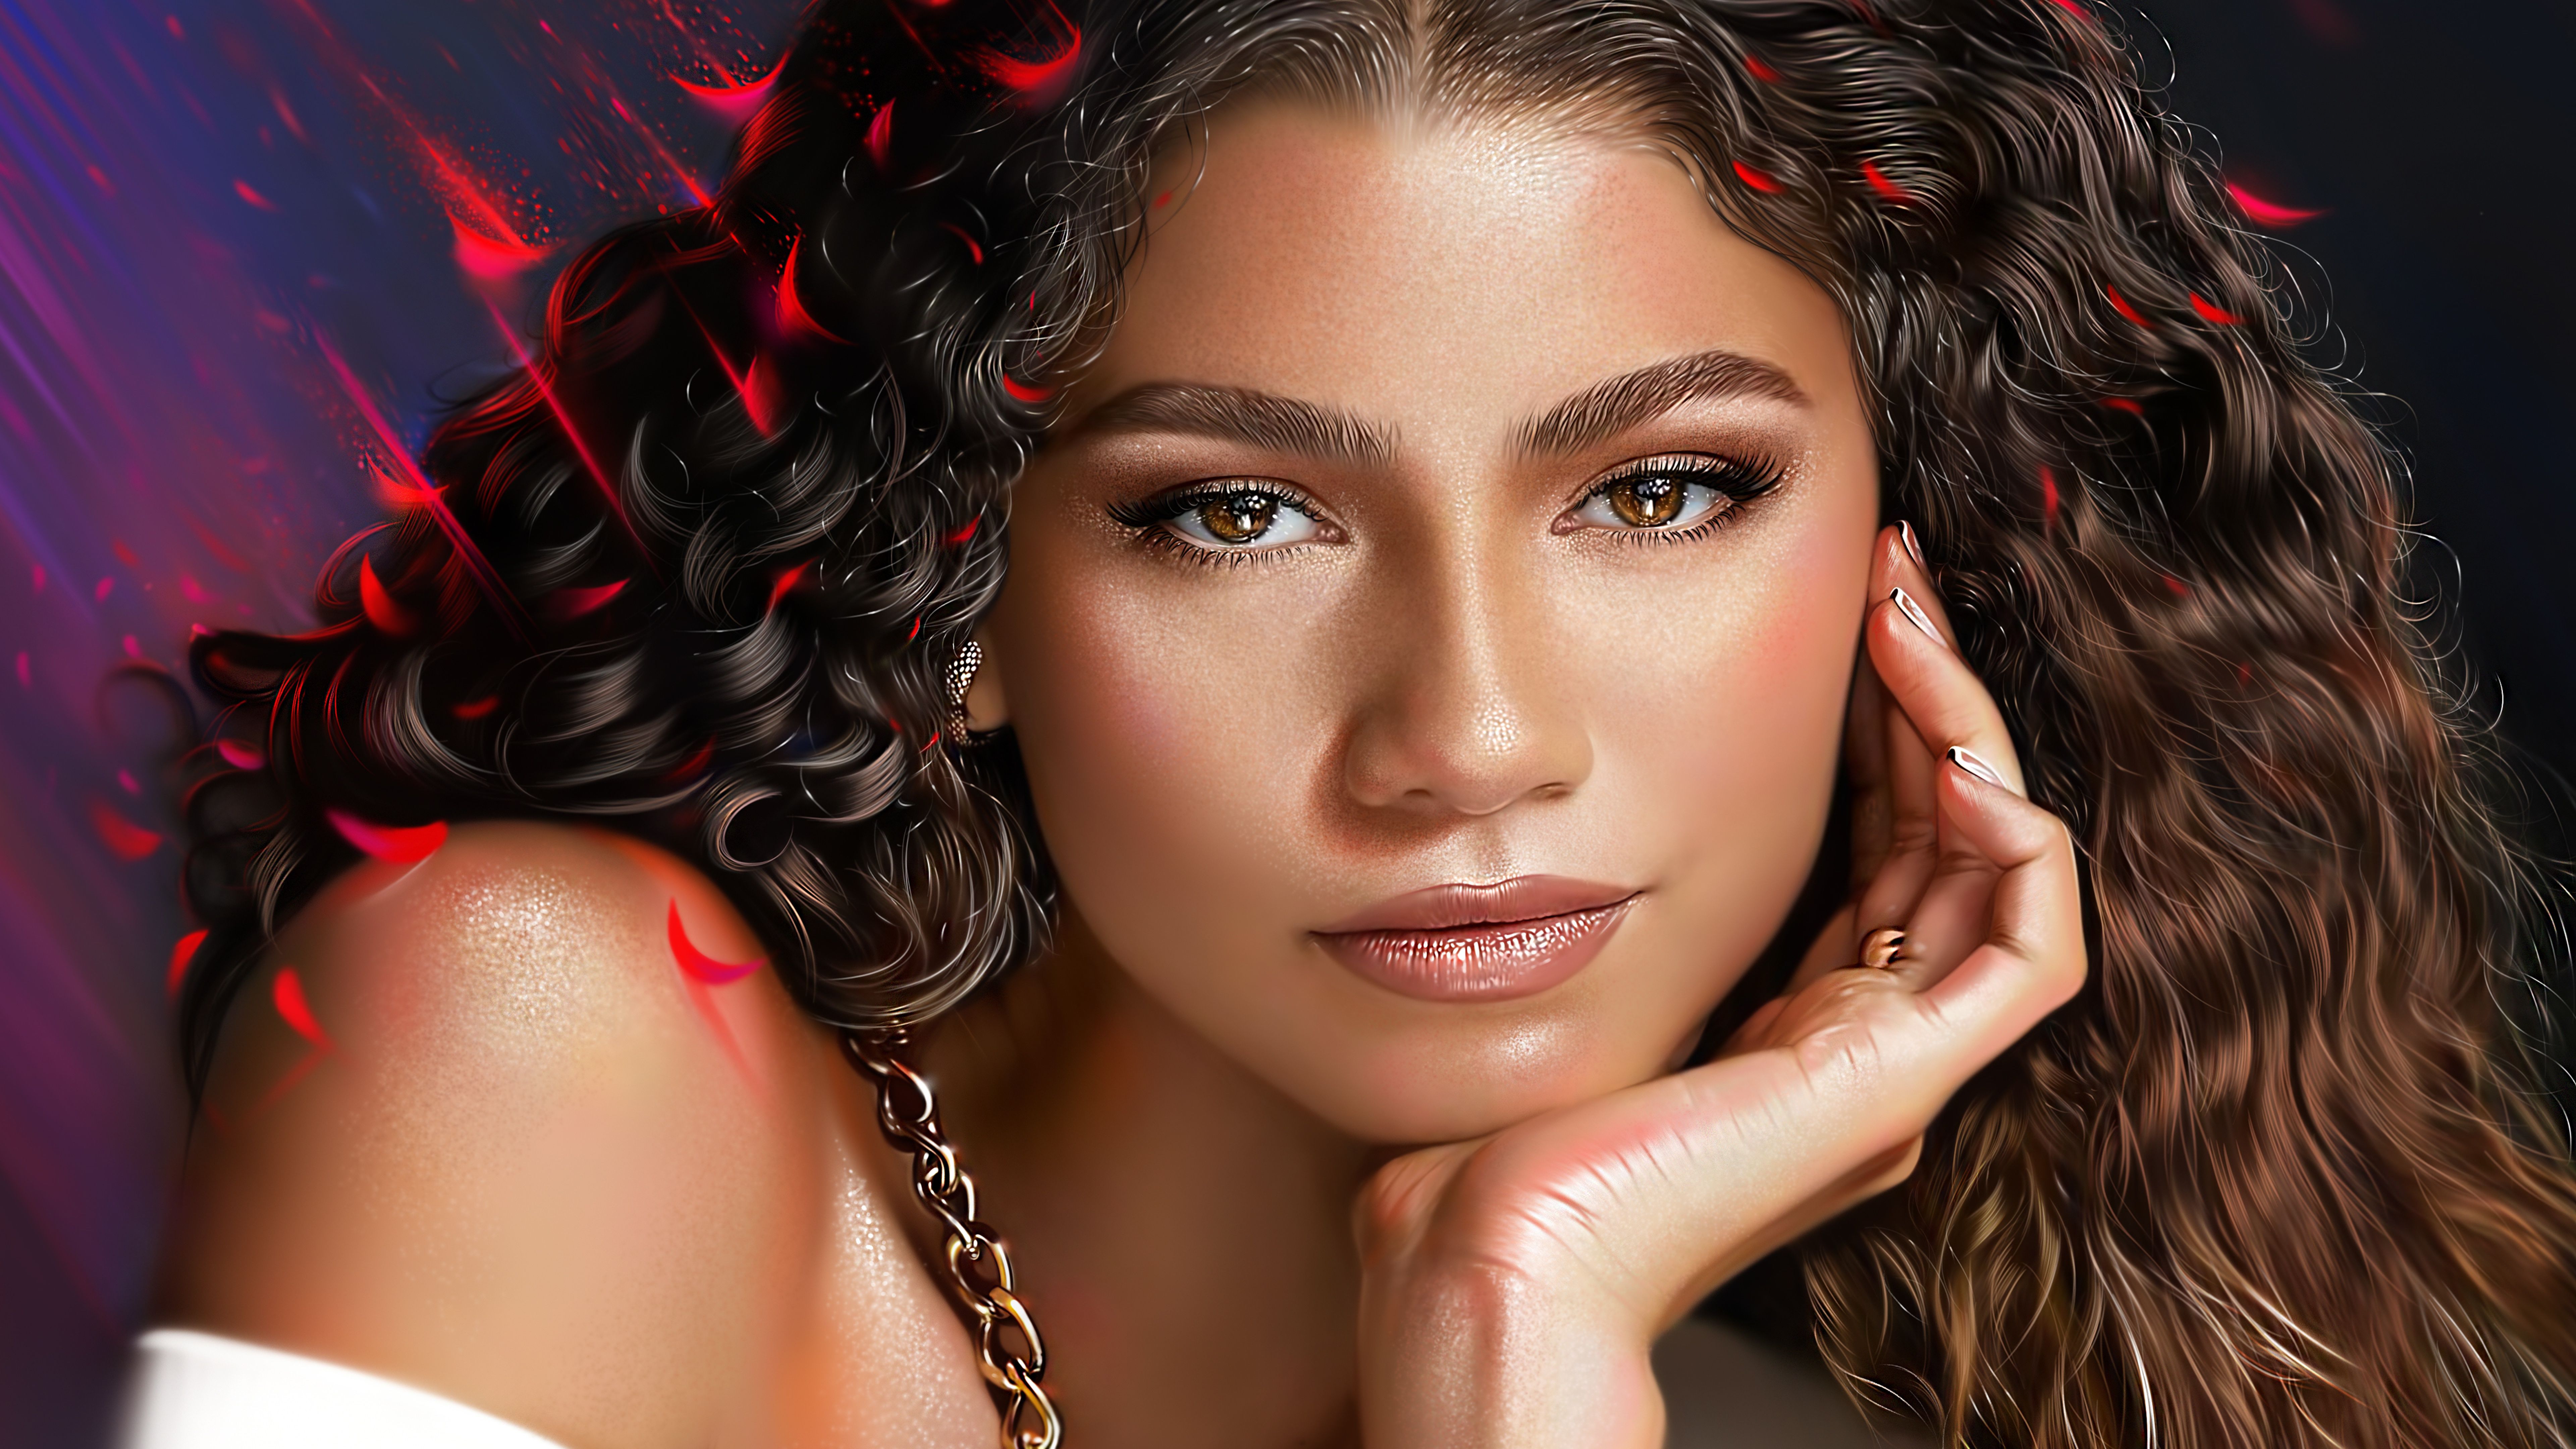 A woman with curly hair and a gold chain around her neck - Zendaya